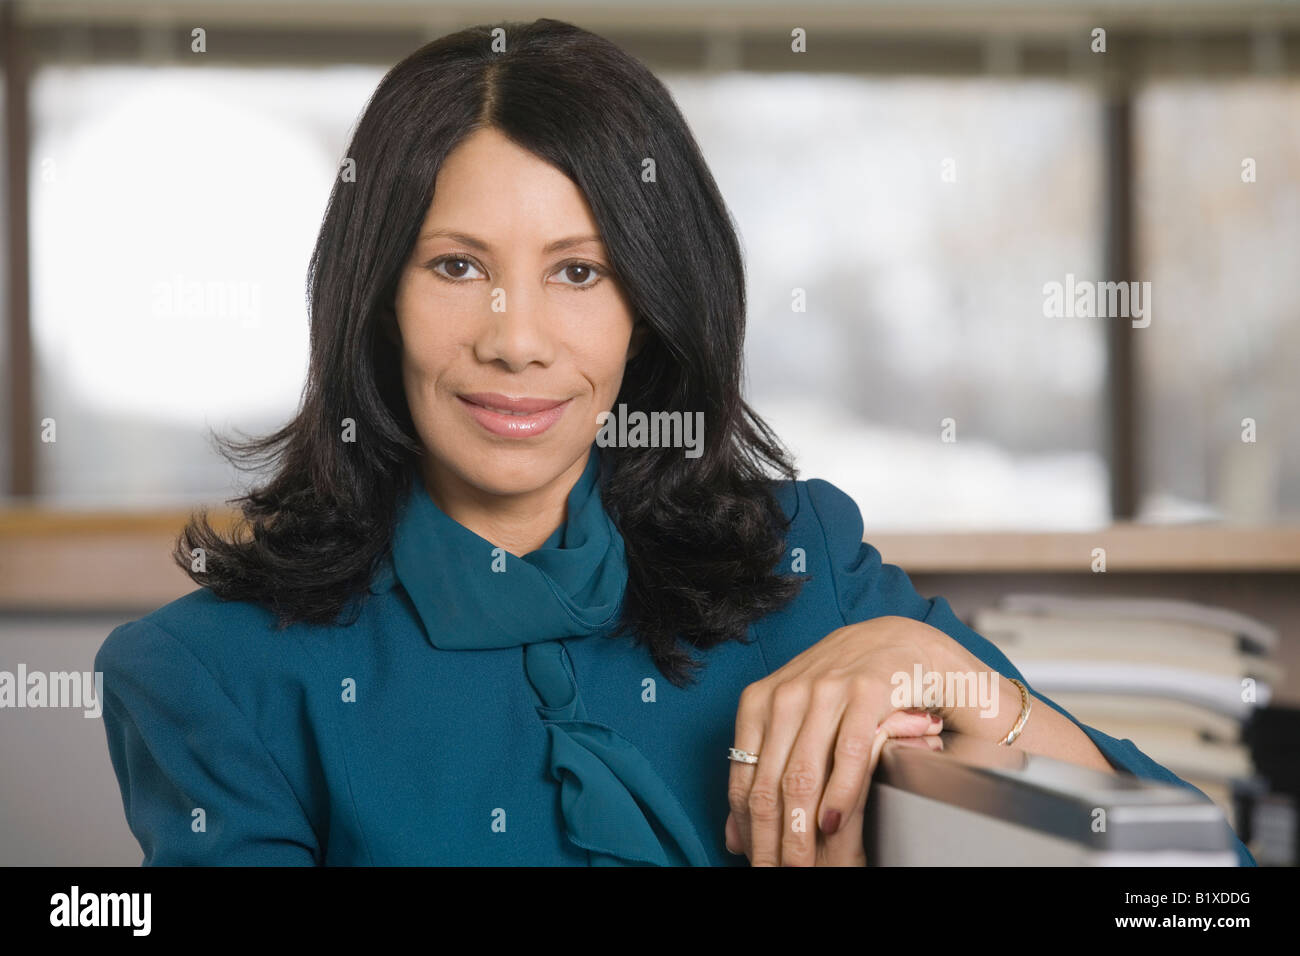 Portrait of a businesswoman smiling Stock Photo